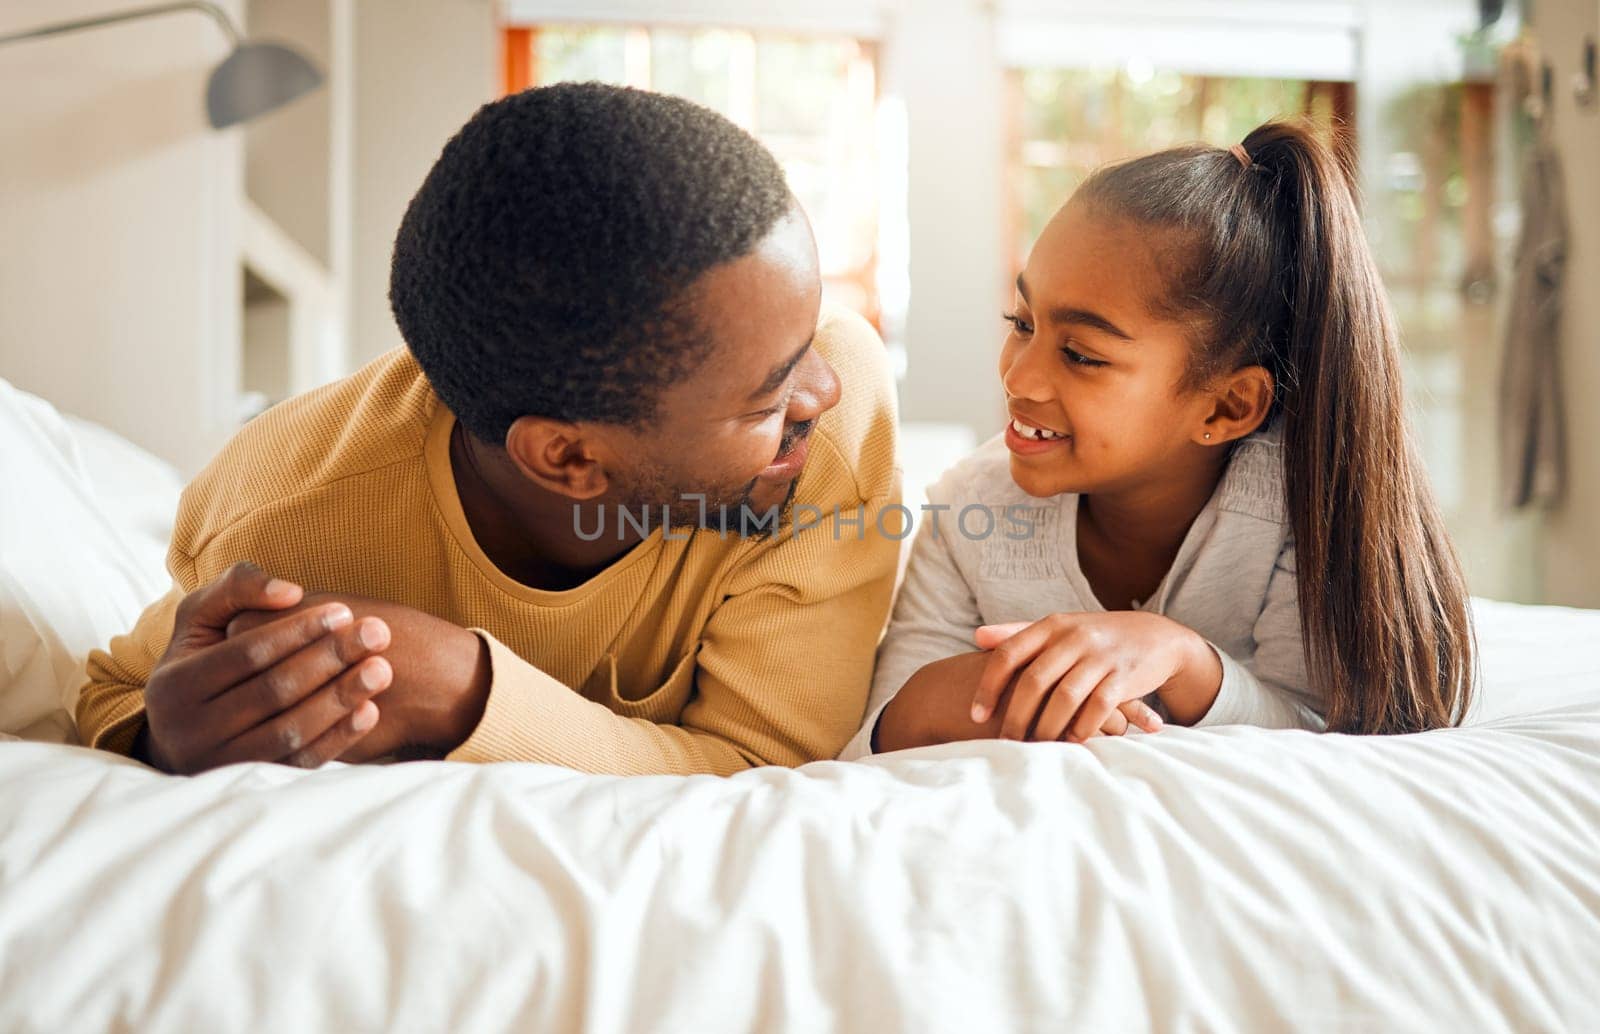 Family, father and girl child talking, spending quality time together with love and care, relax in bedroom at home. Black man, kid and happy people, communication and relationship with childhood.